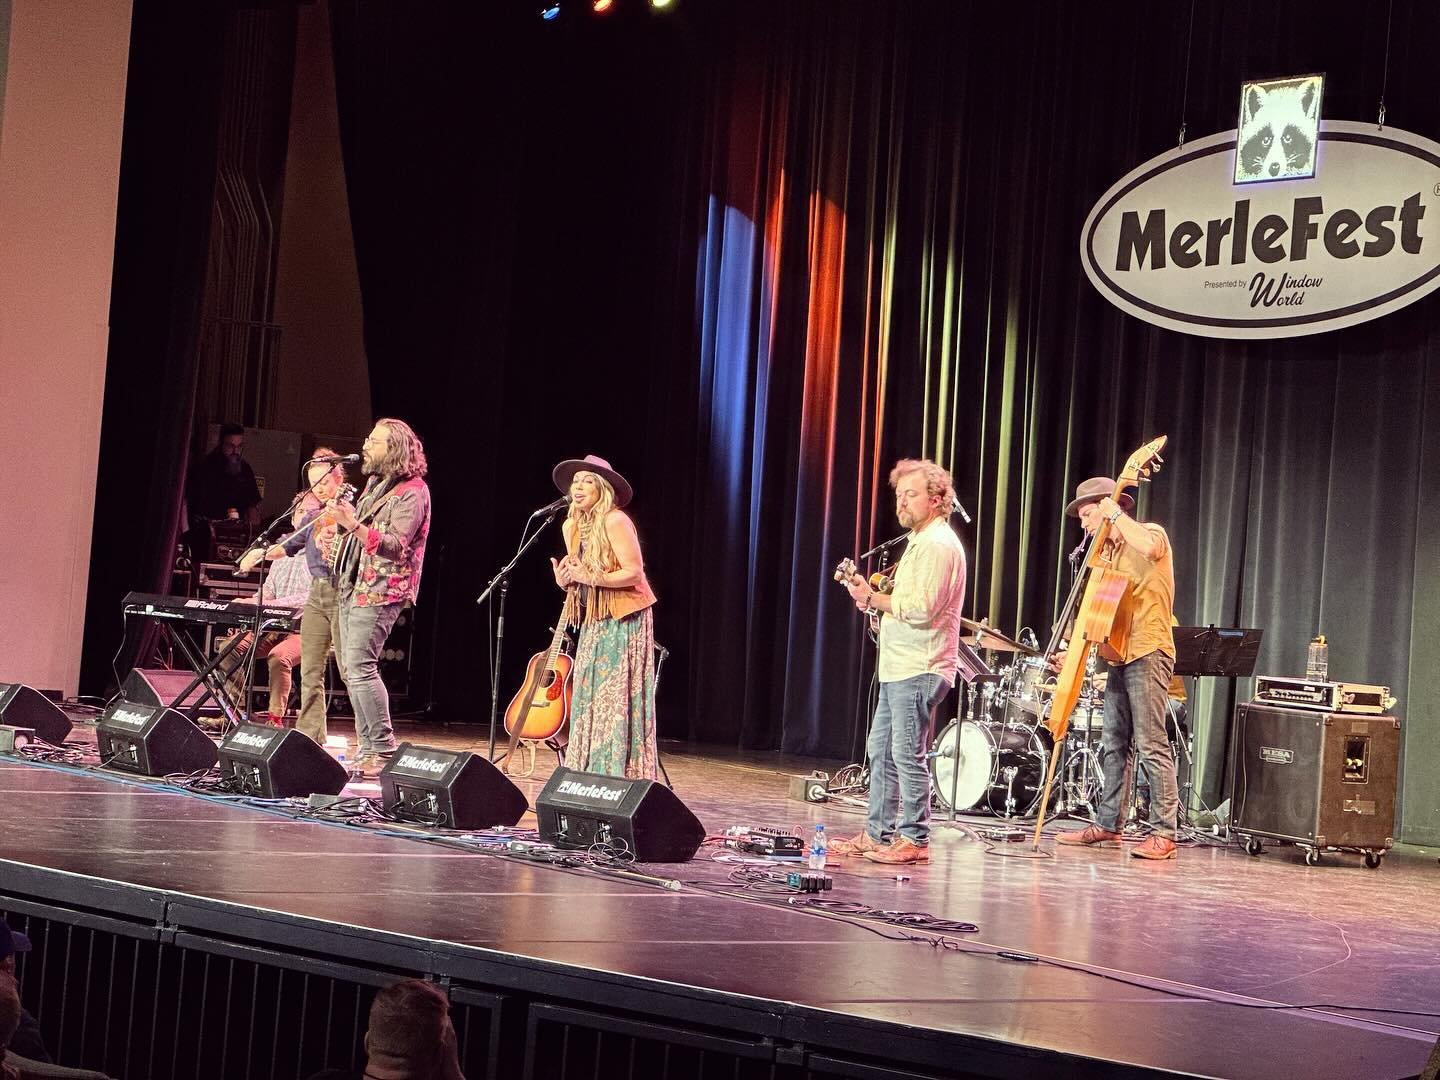 What a thrill to be back playing at @merlefest !!